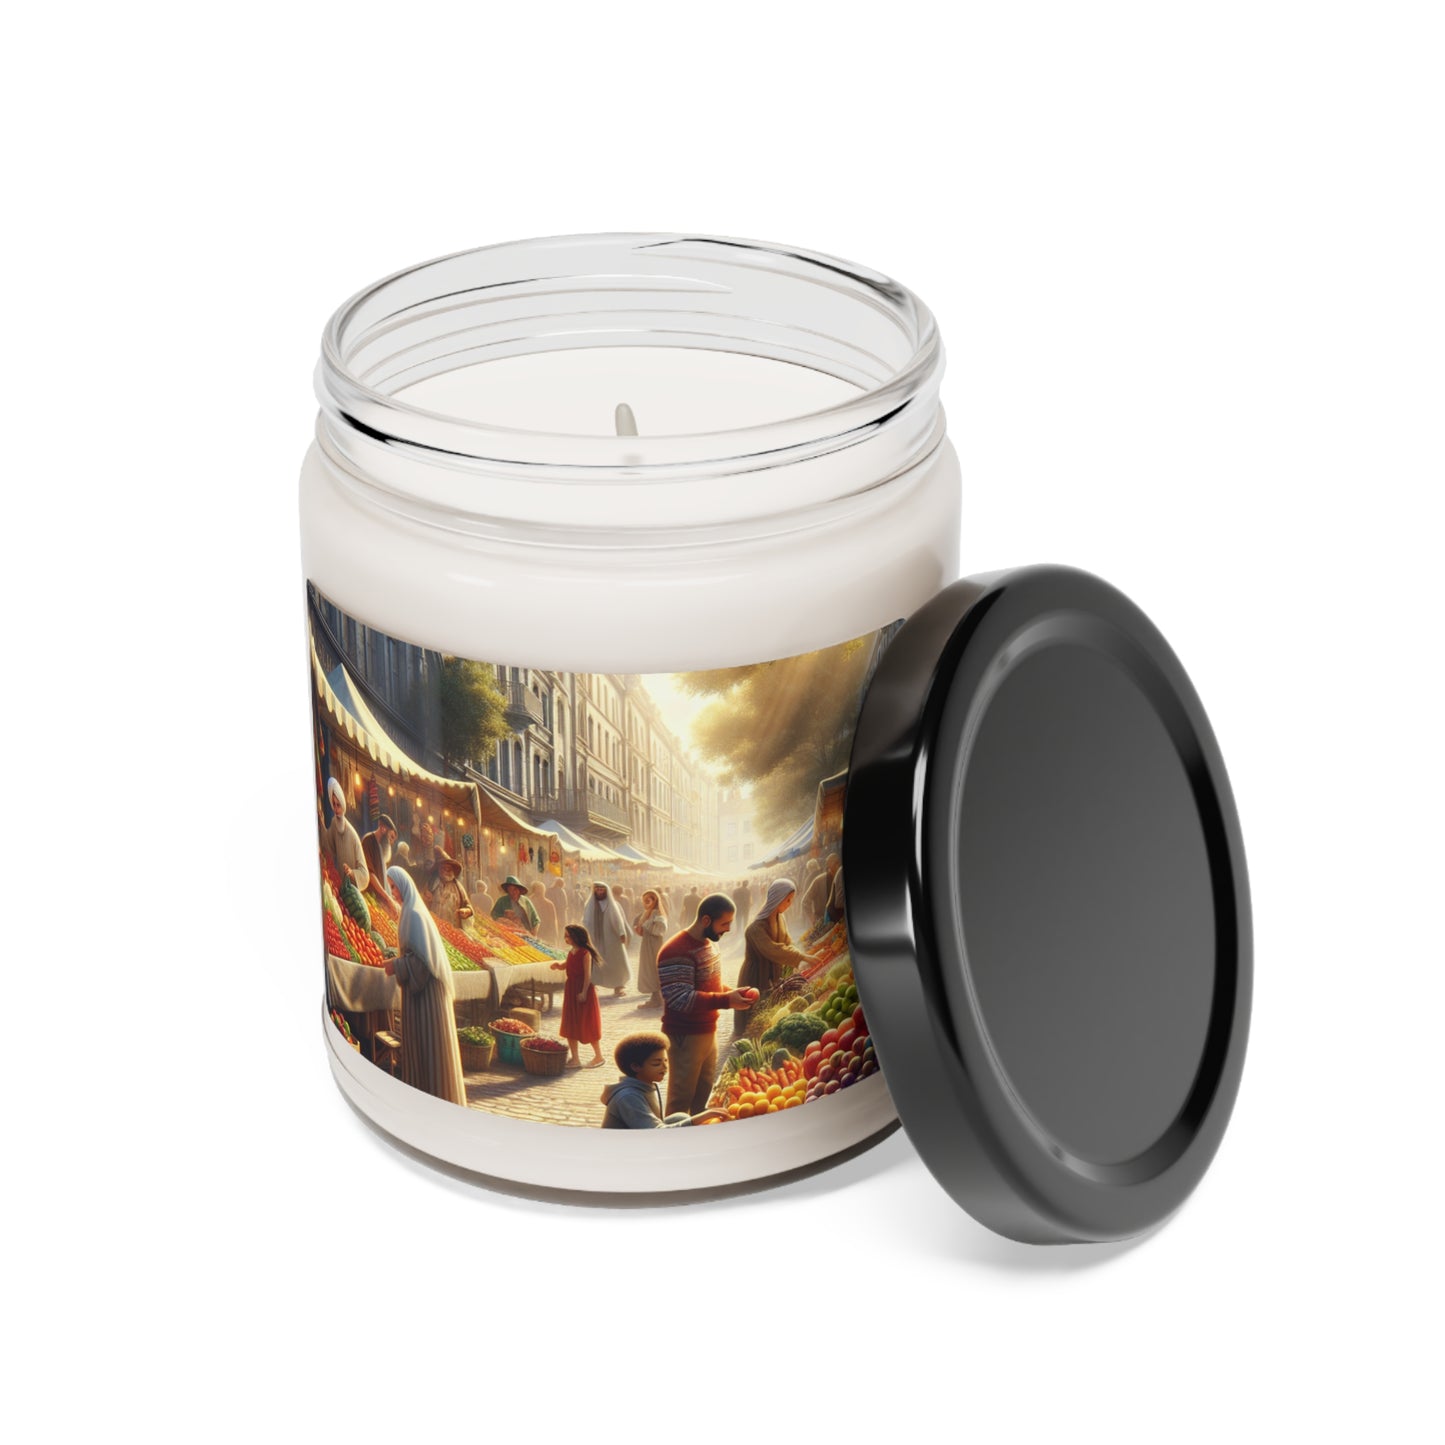 "Sunny Vibes at the Outdoor Market" - The Alien Scented Soy Candle 9oz Realism Style